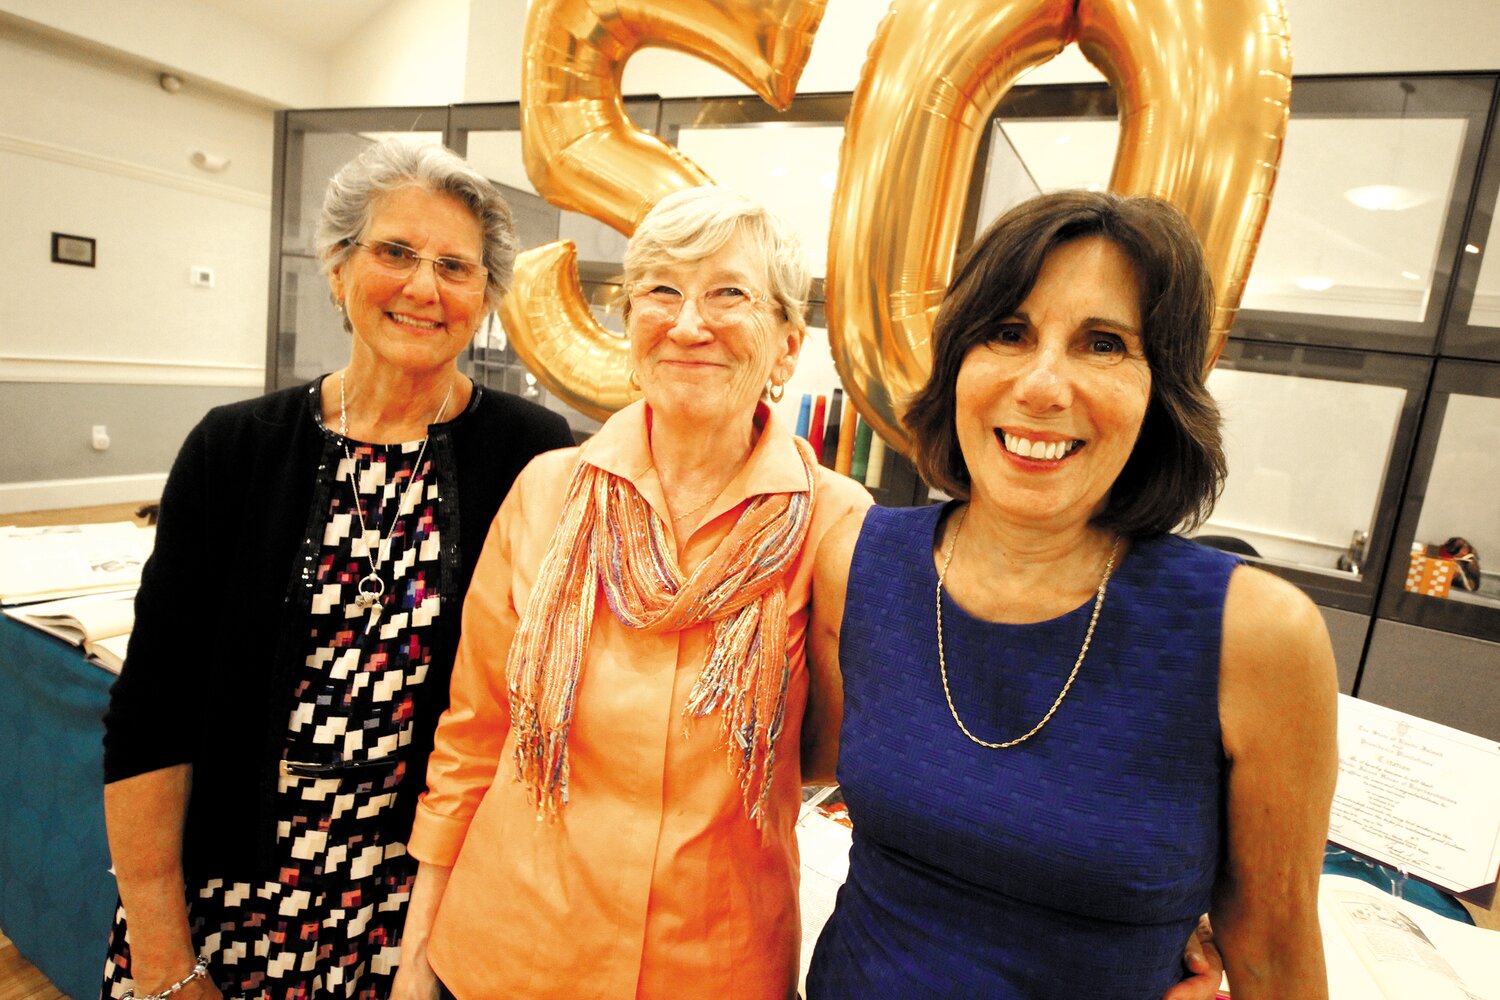 DYNAMIC TRIO: Three of the women who played critical roles in the programs and development of Cornerstone gather to share memories. From left they are Kim Morris who served as activities director of 35 years; Andrea Whitney who preceded her and Roberta Merkle who guided the center through its growth and is now executive vice president of strategic initiatives for Saint Elizabeth Community. (Warwick Beacon photos)